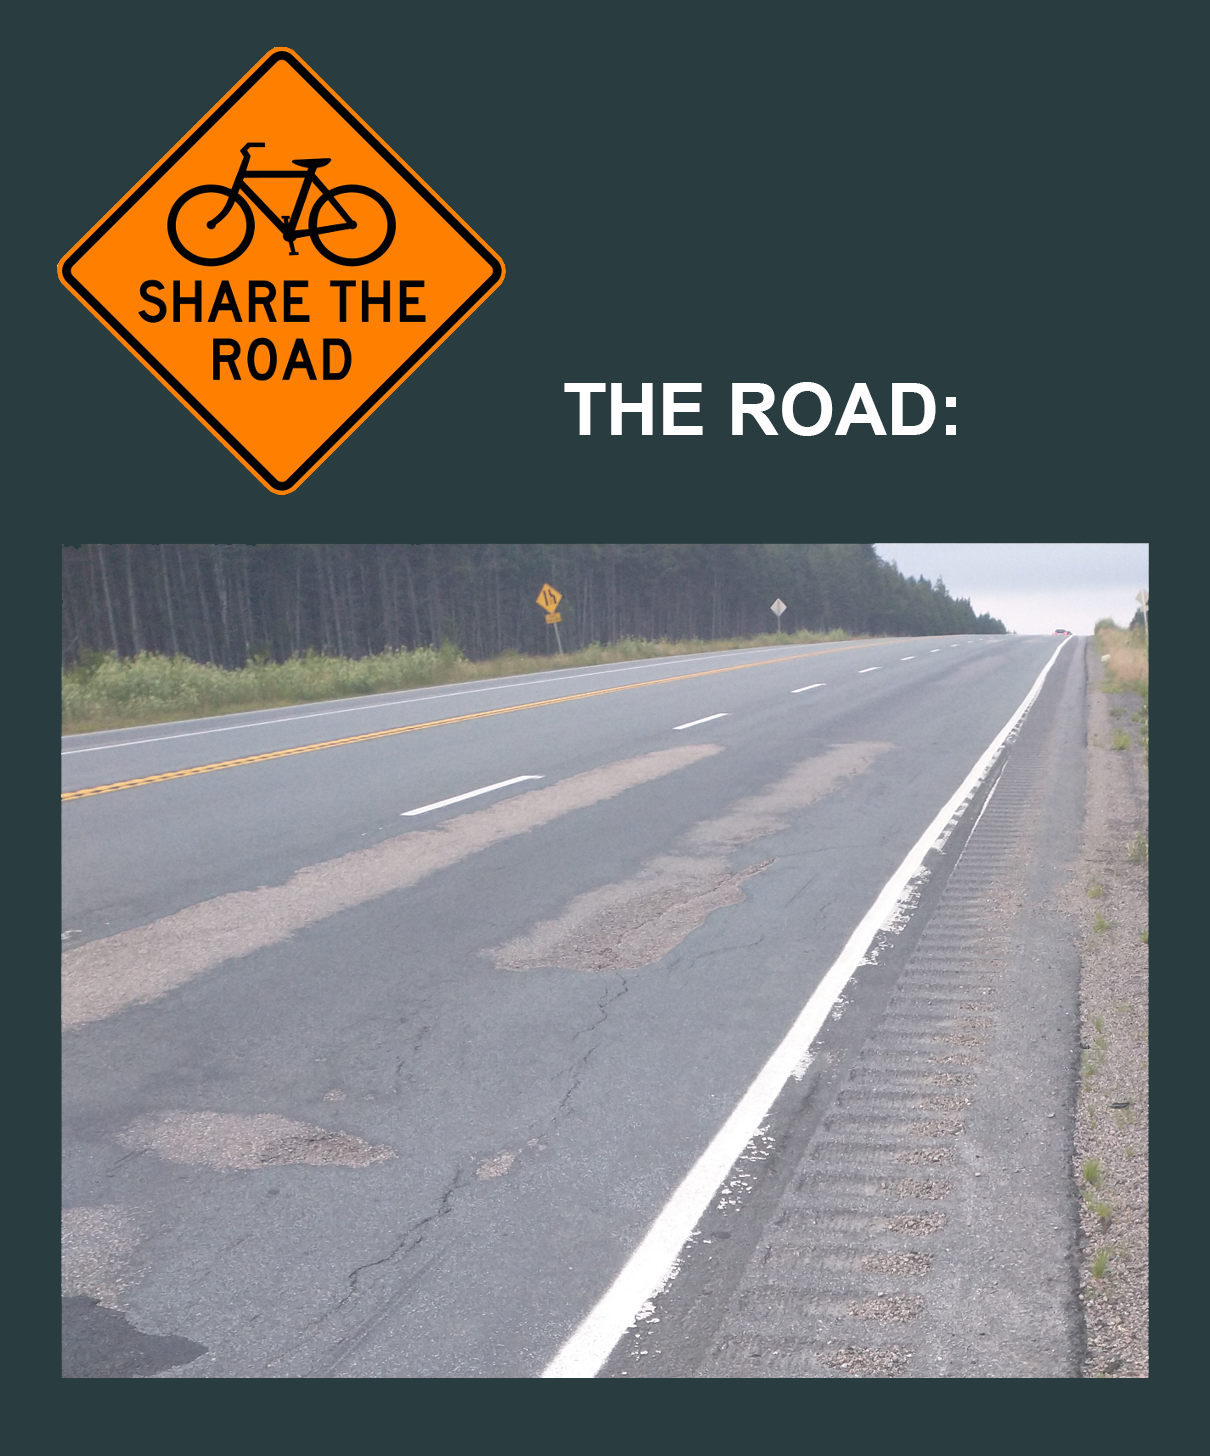 Just because you add a "share the road" sign doesn't make it safe or possible. What's this rumble strip even for? To warn you 0.2 seconds before you die?